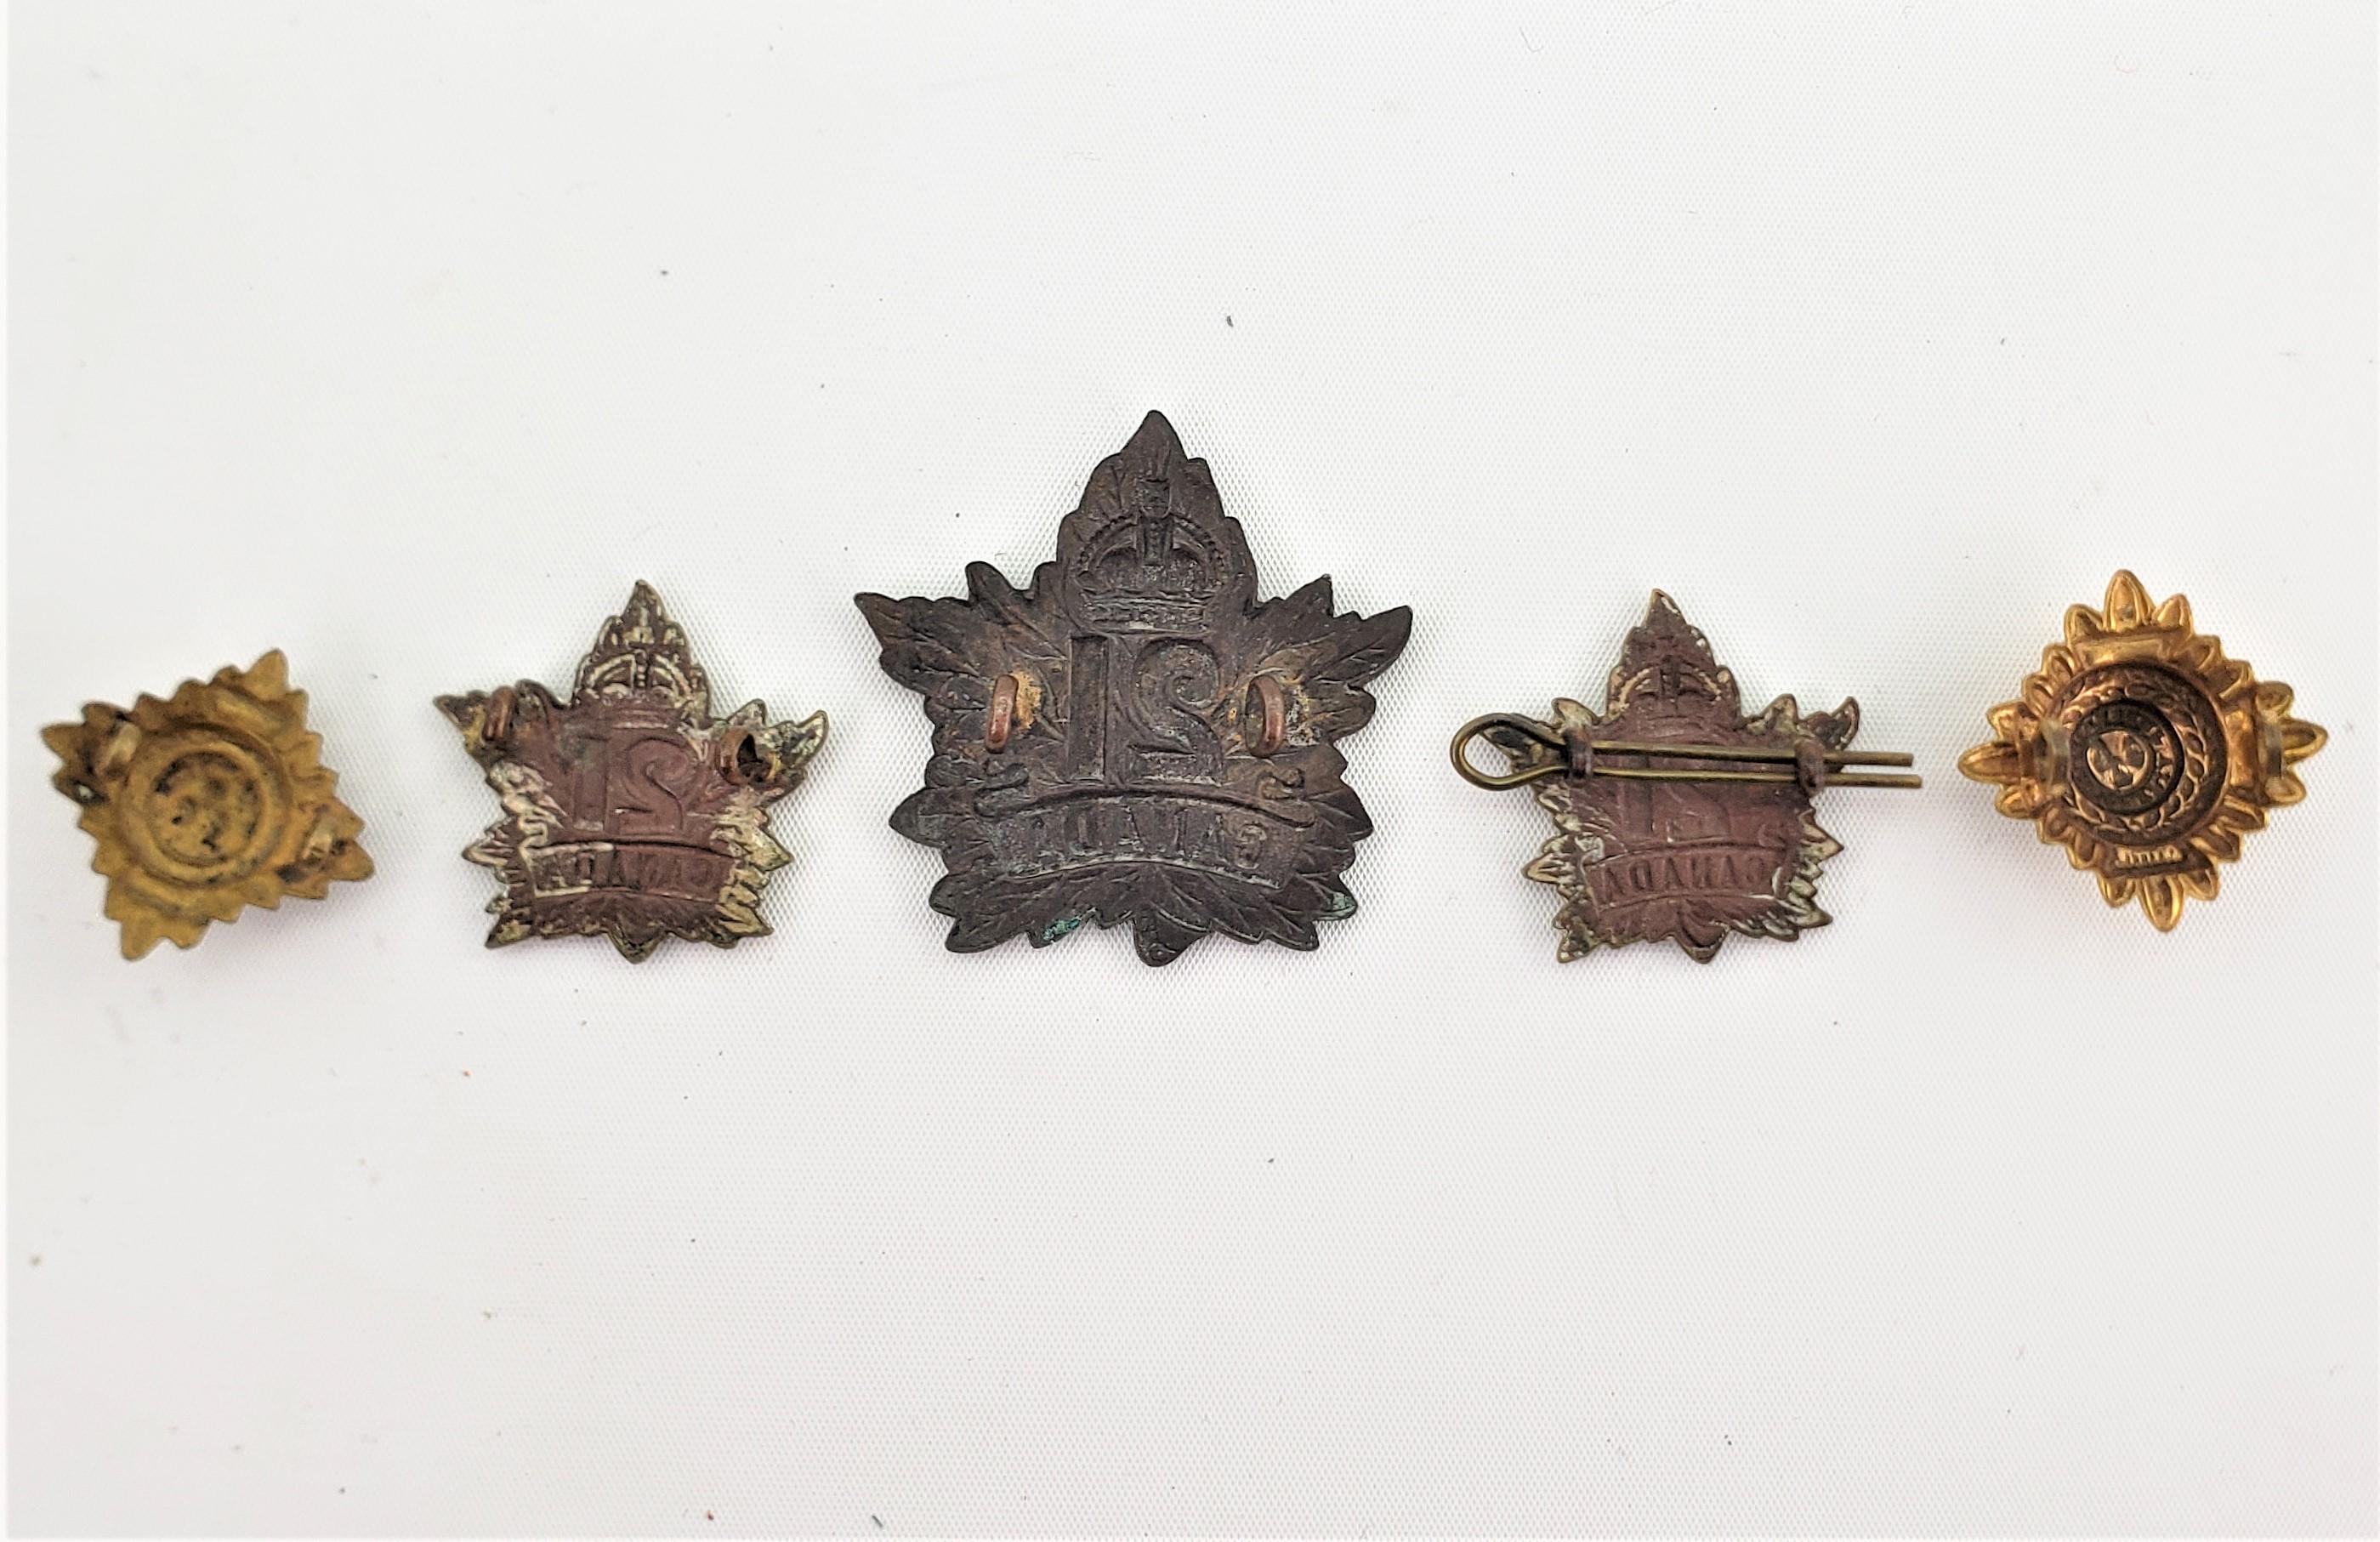 Brass Canadian WW1 21st Regiment Soldier's Uniform Buttons, Badges & Medals Grouping For Sale